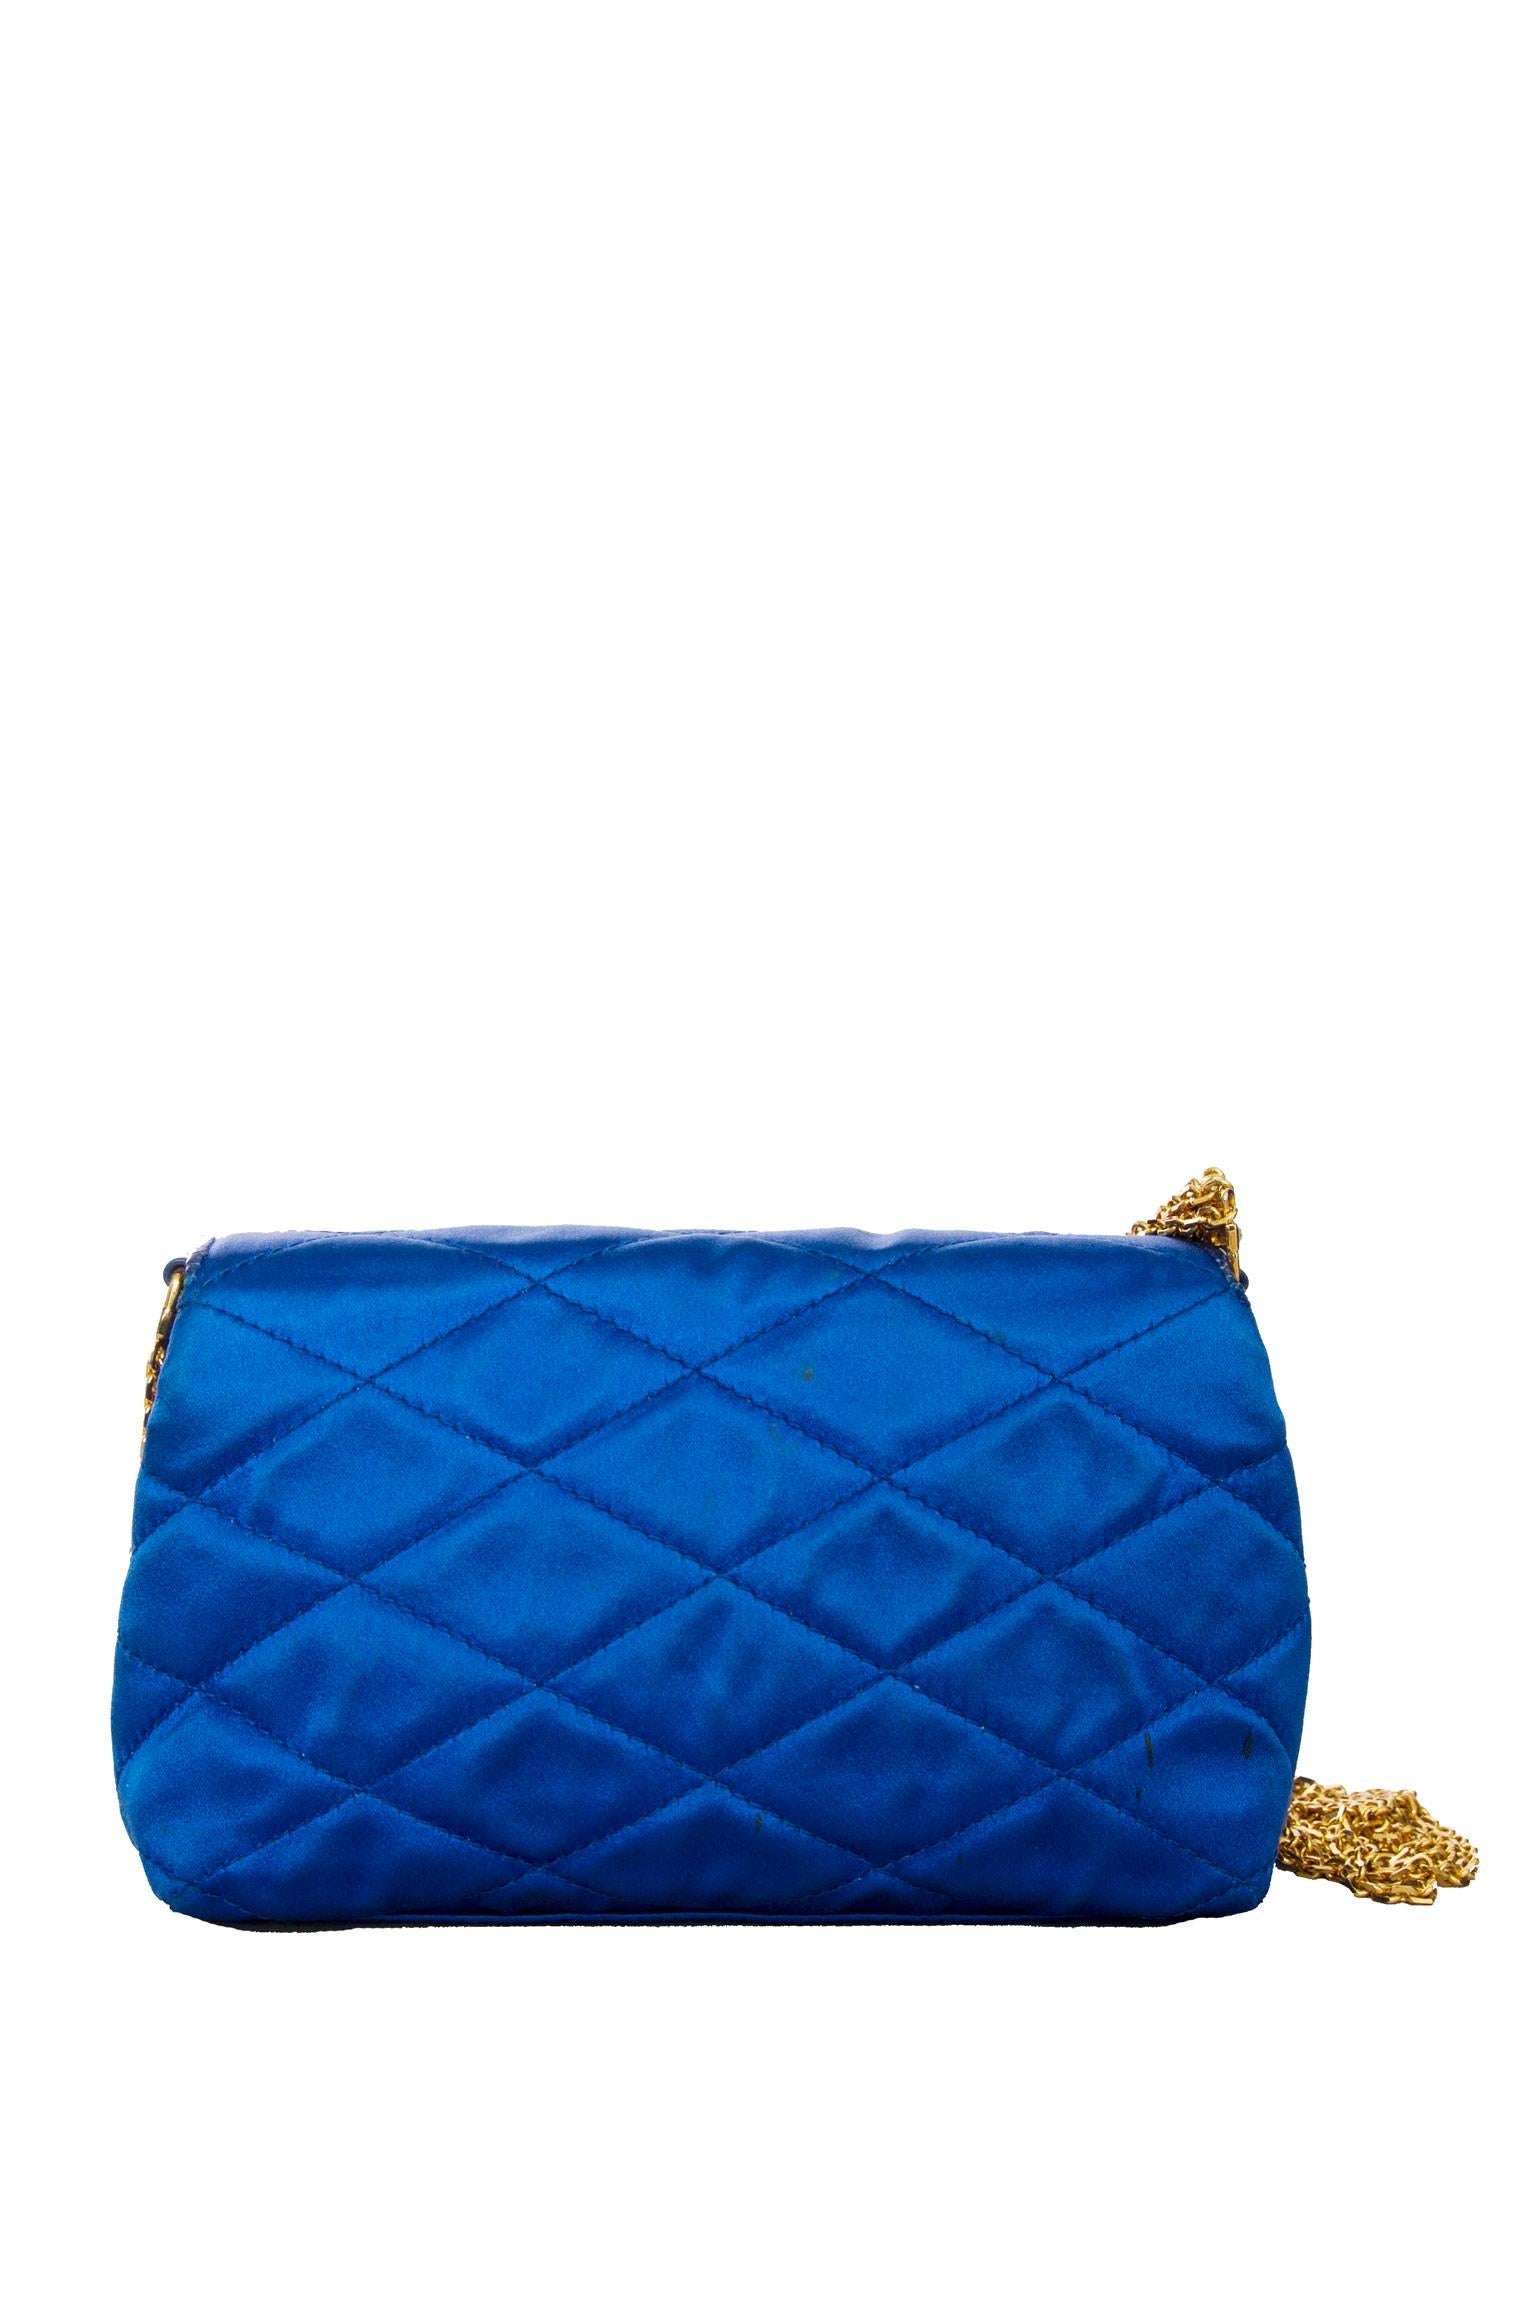 1980s Glamorous Chanel Quilted Blue Satin Evening Bag  2